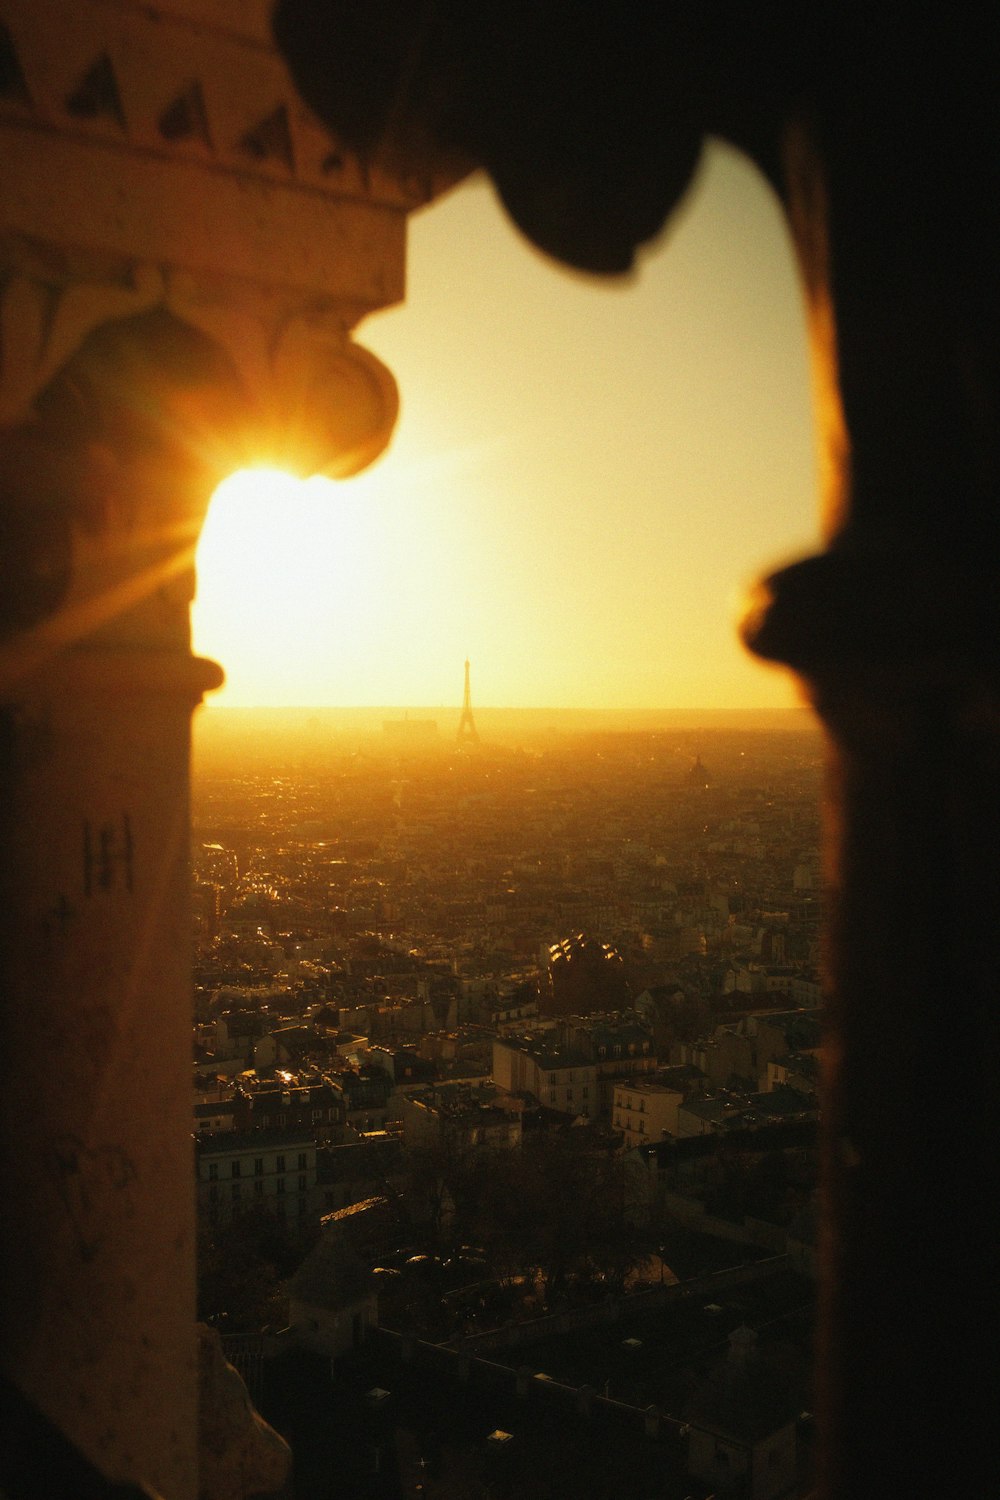 the sun is setting over the city of paris